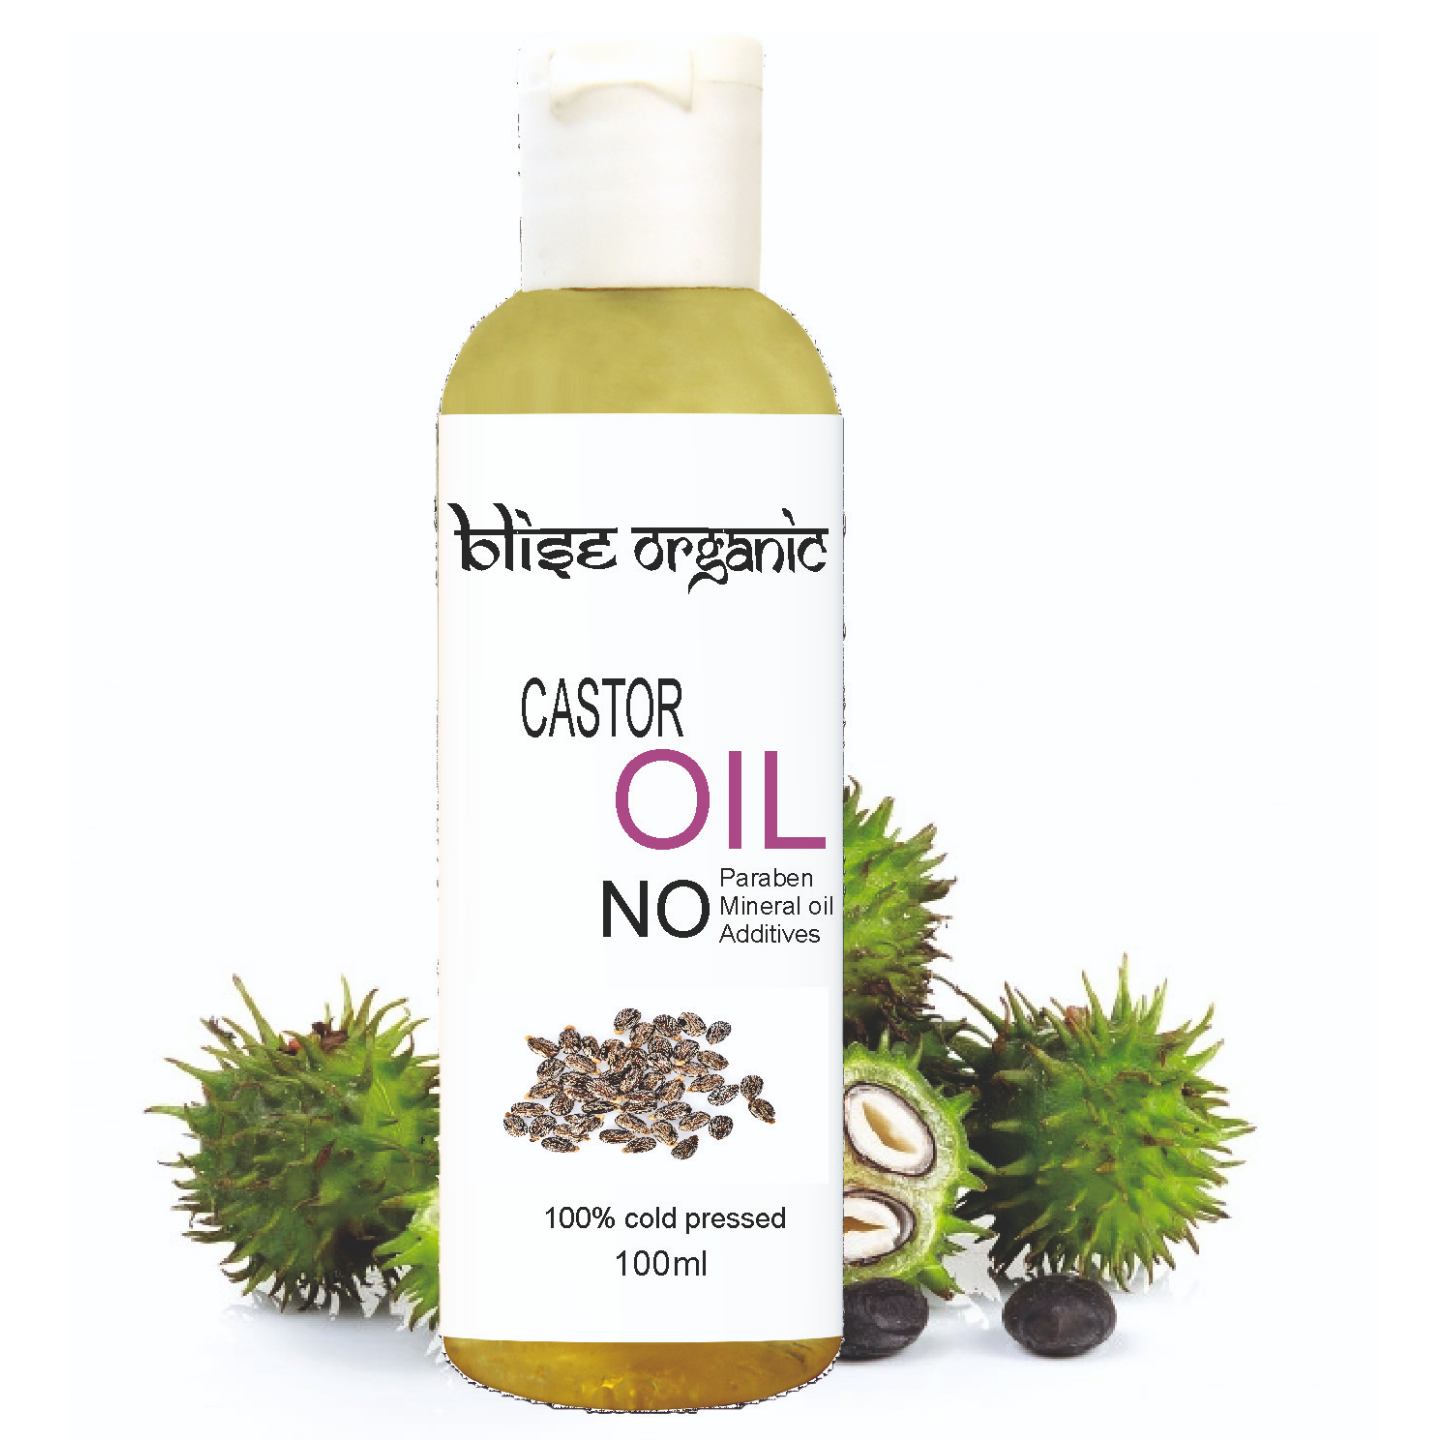 Castor Oil for Healthier Skin, Hair and Nails with 100% Pure and Natur